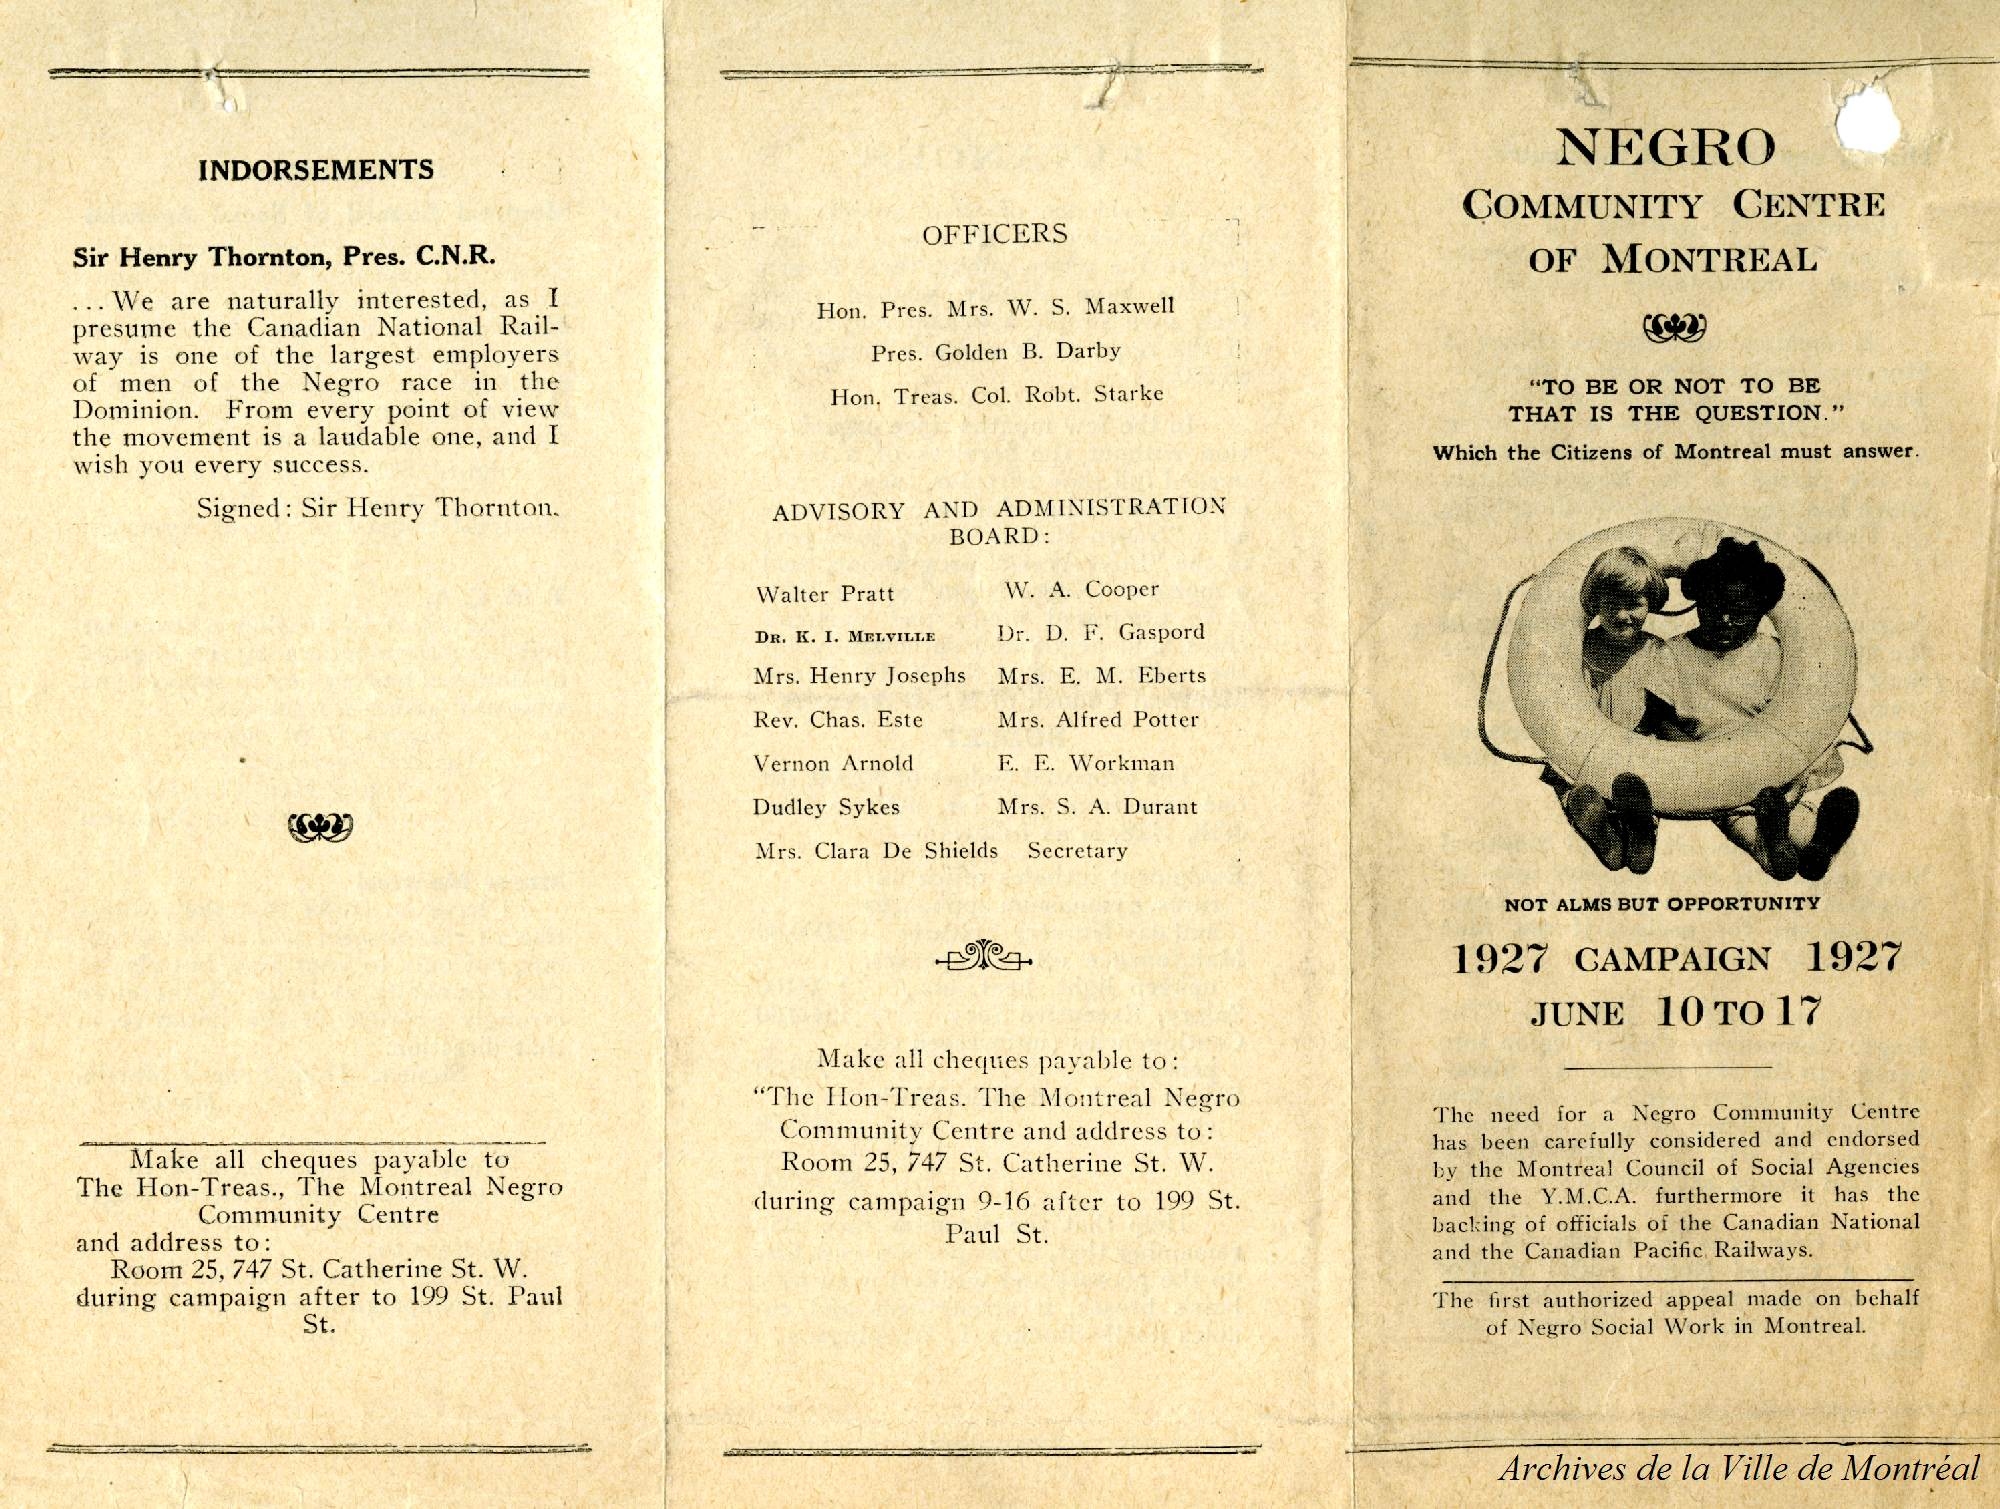 Negro Community Center of Montreal subscription pamphlet